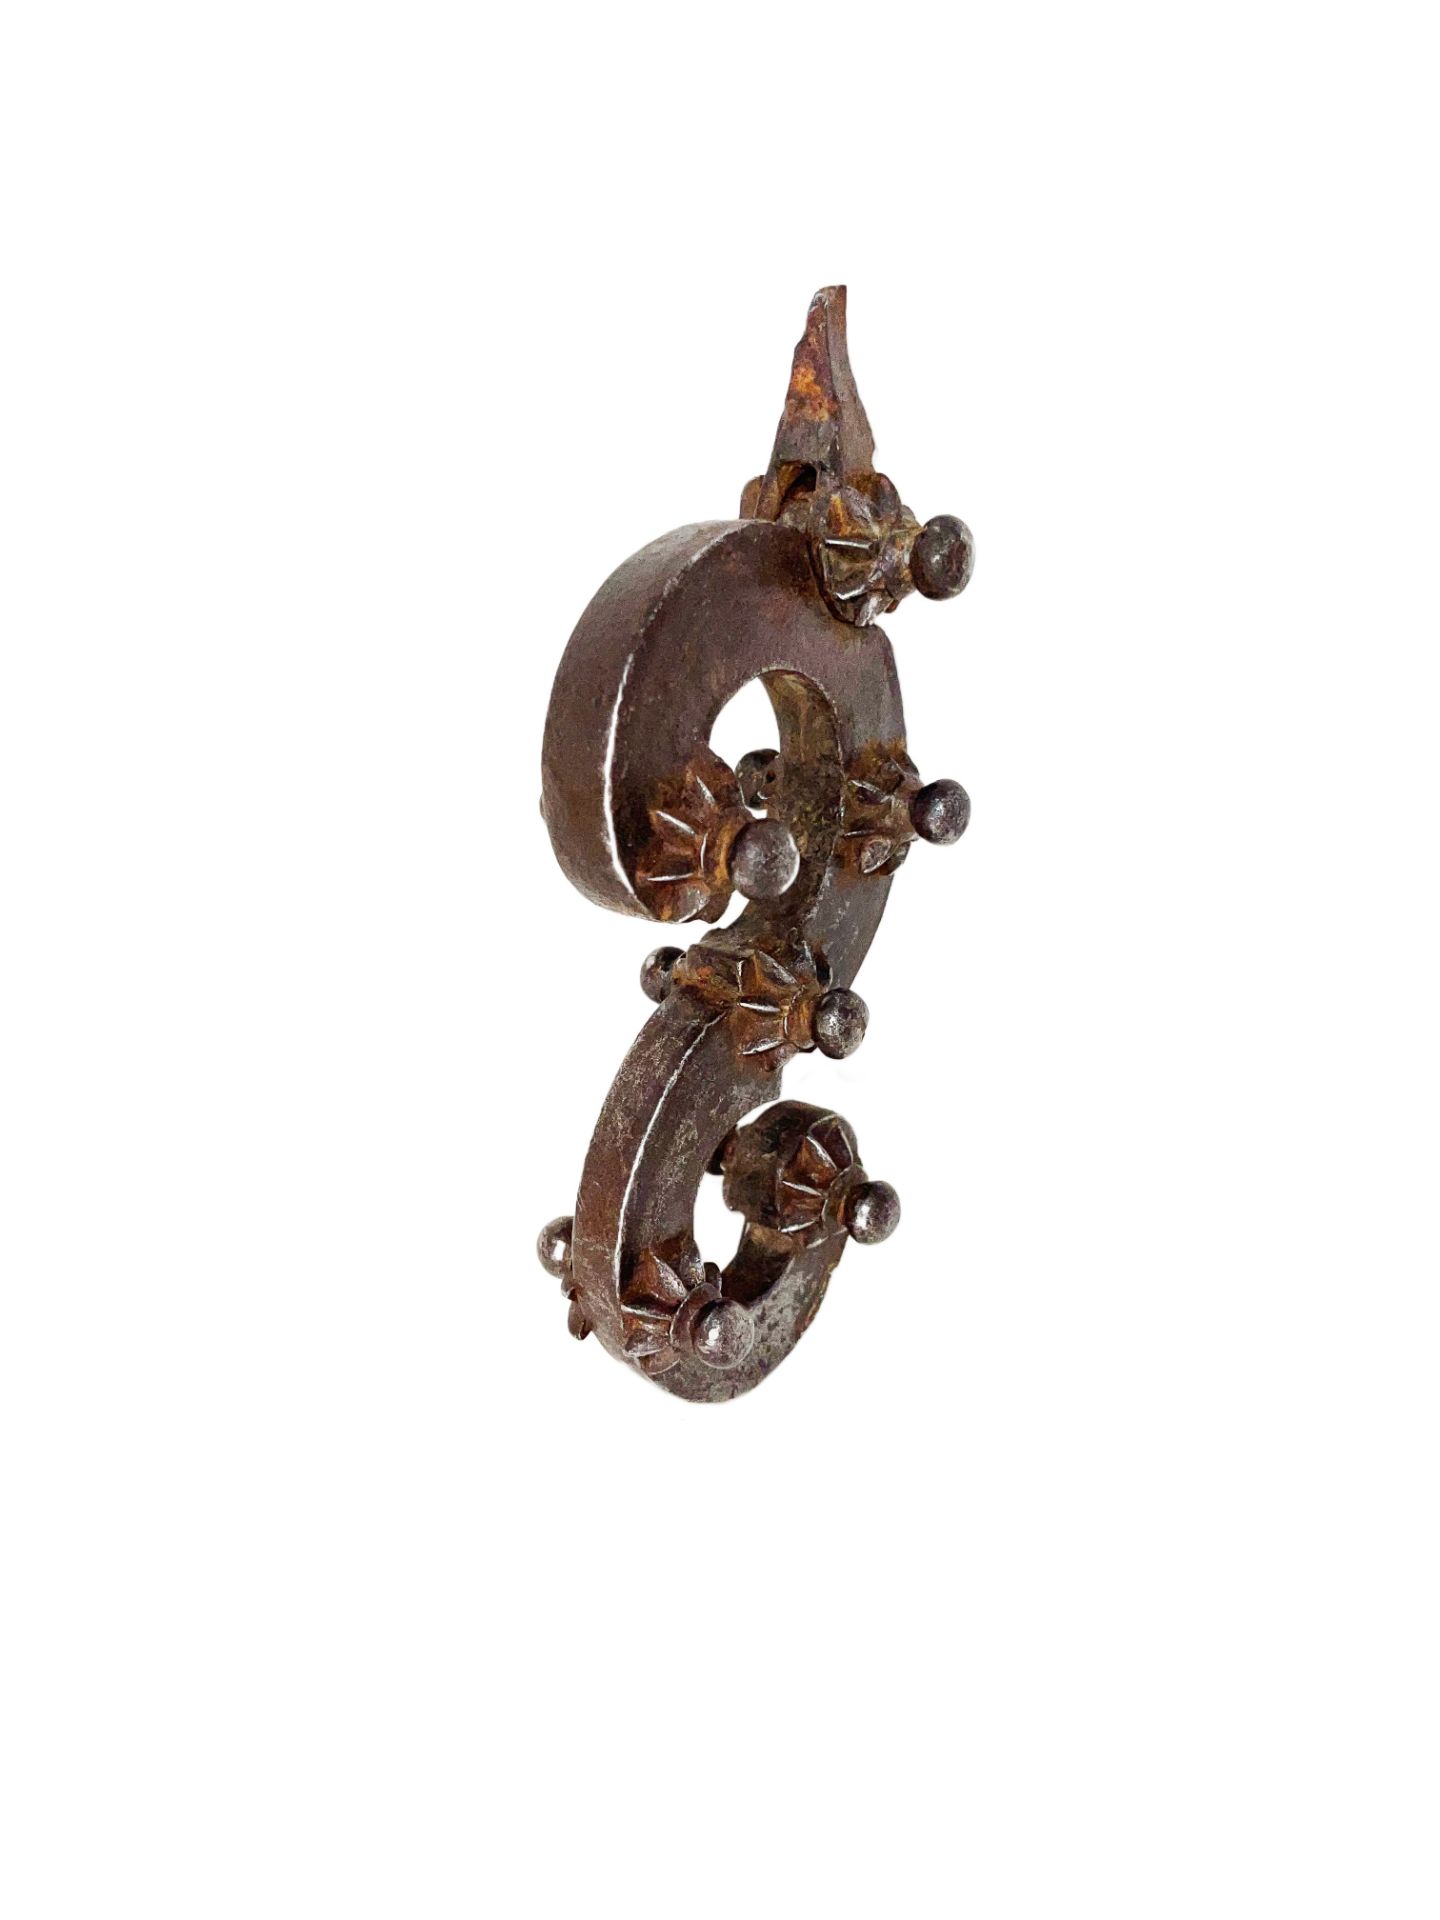 Strong wrought iron door knocker in the shape of an S Section decorated on each side with six